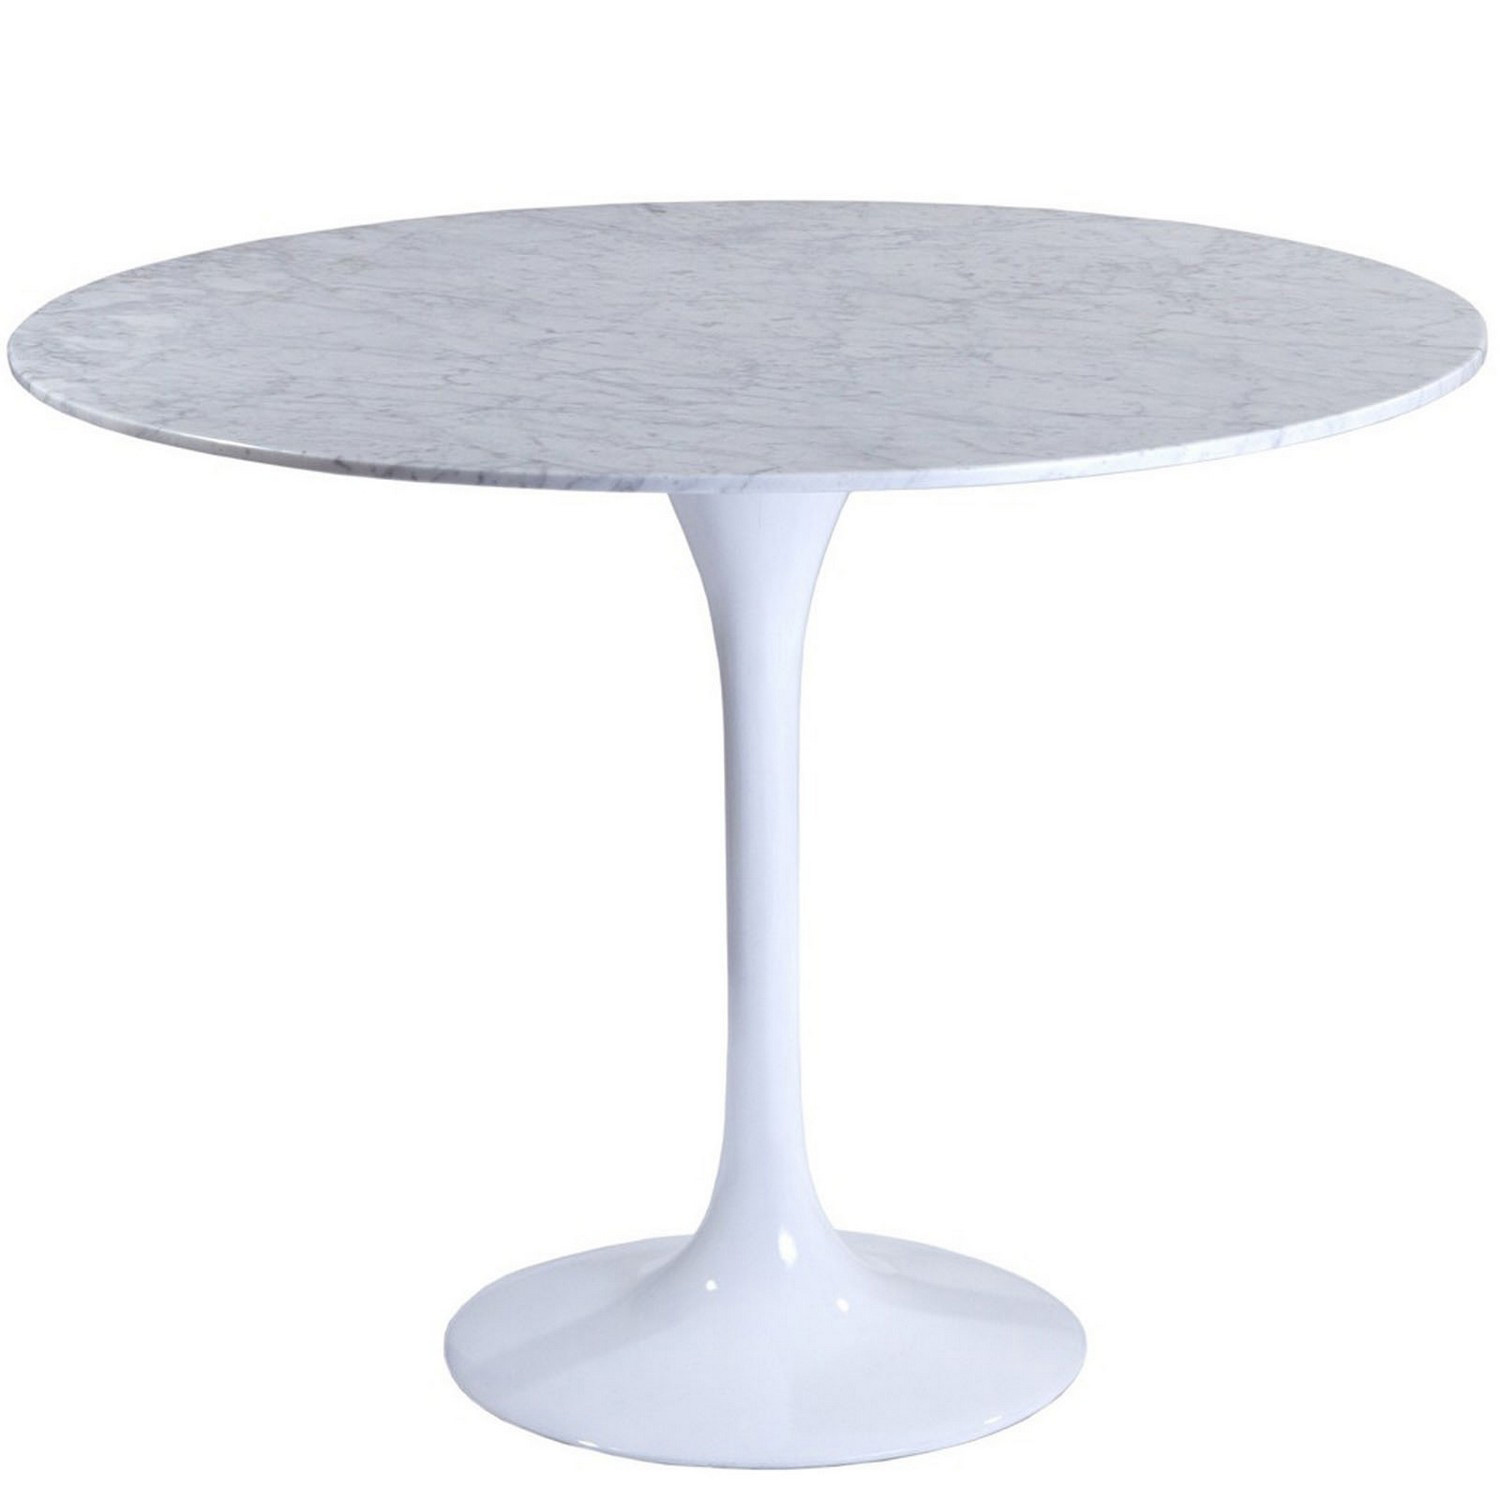 Modway Lippa 36 Marble Dining Table - White